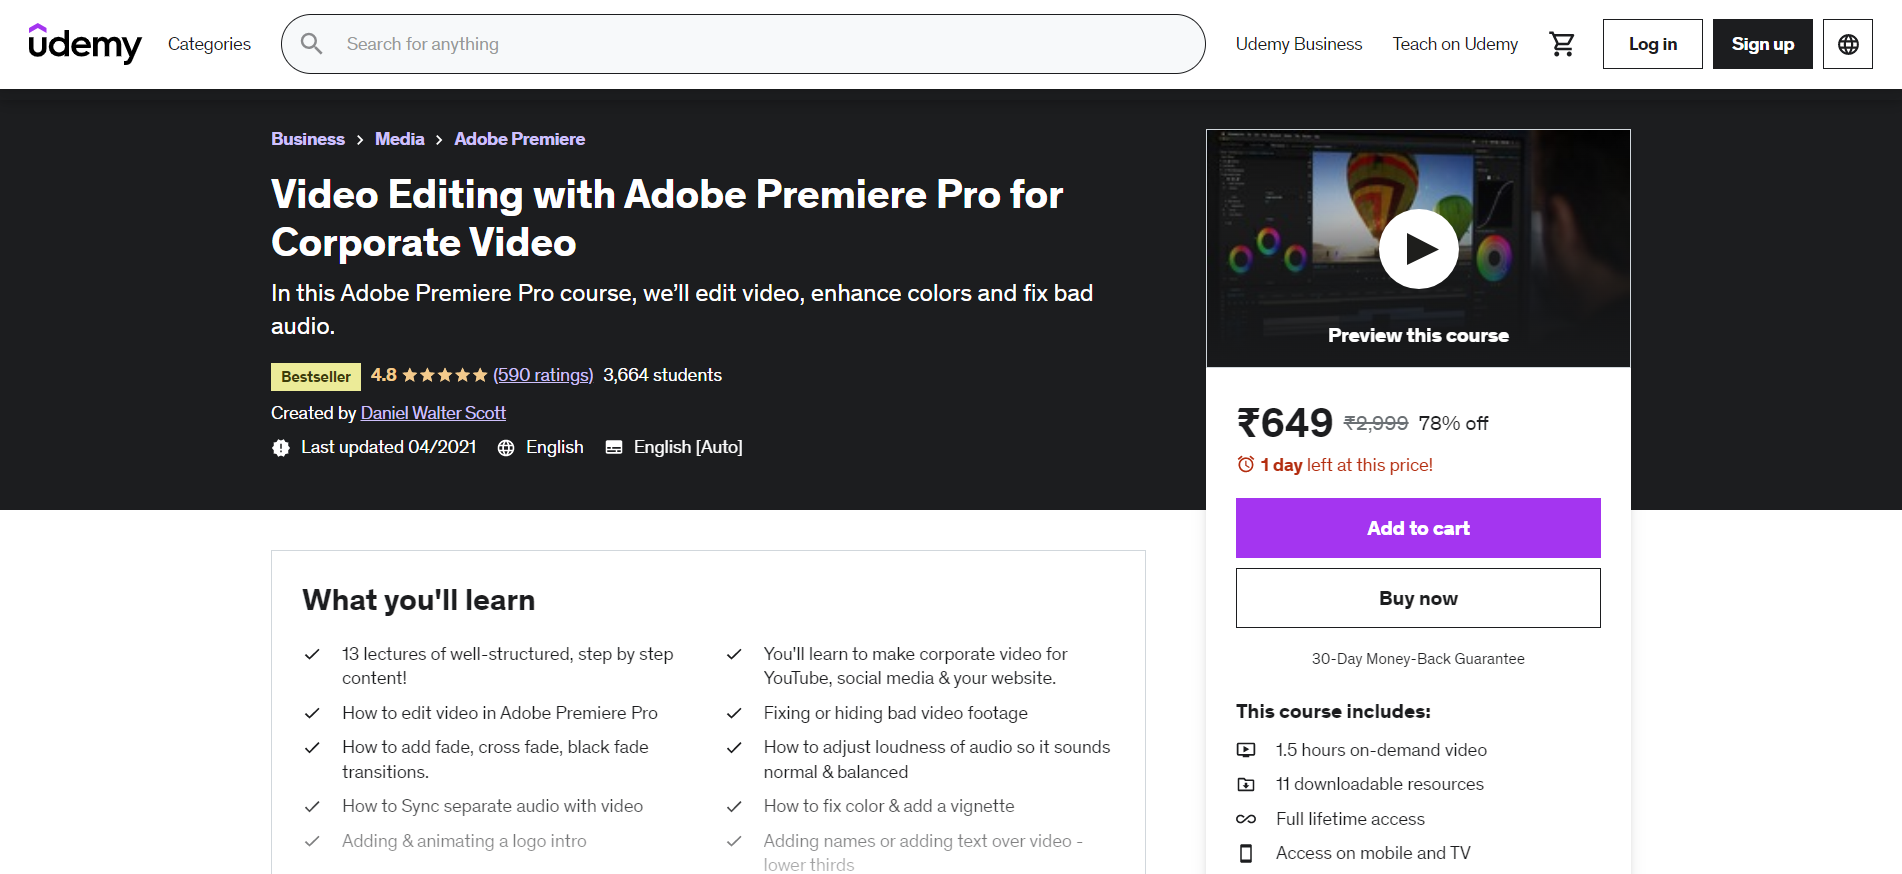 Video Editing With Adobe Premiere Pro For Corporate Video